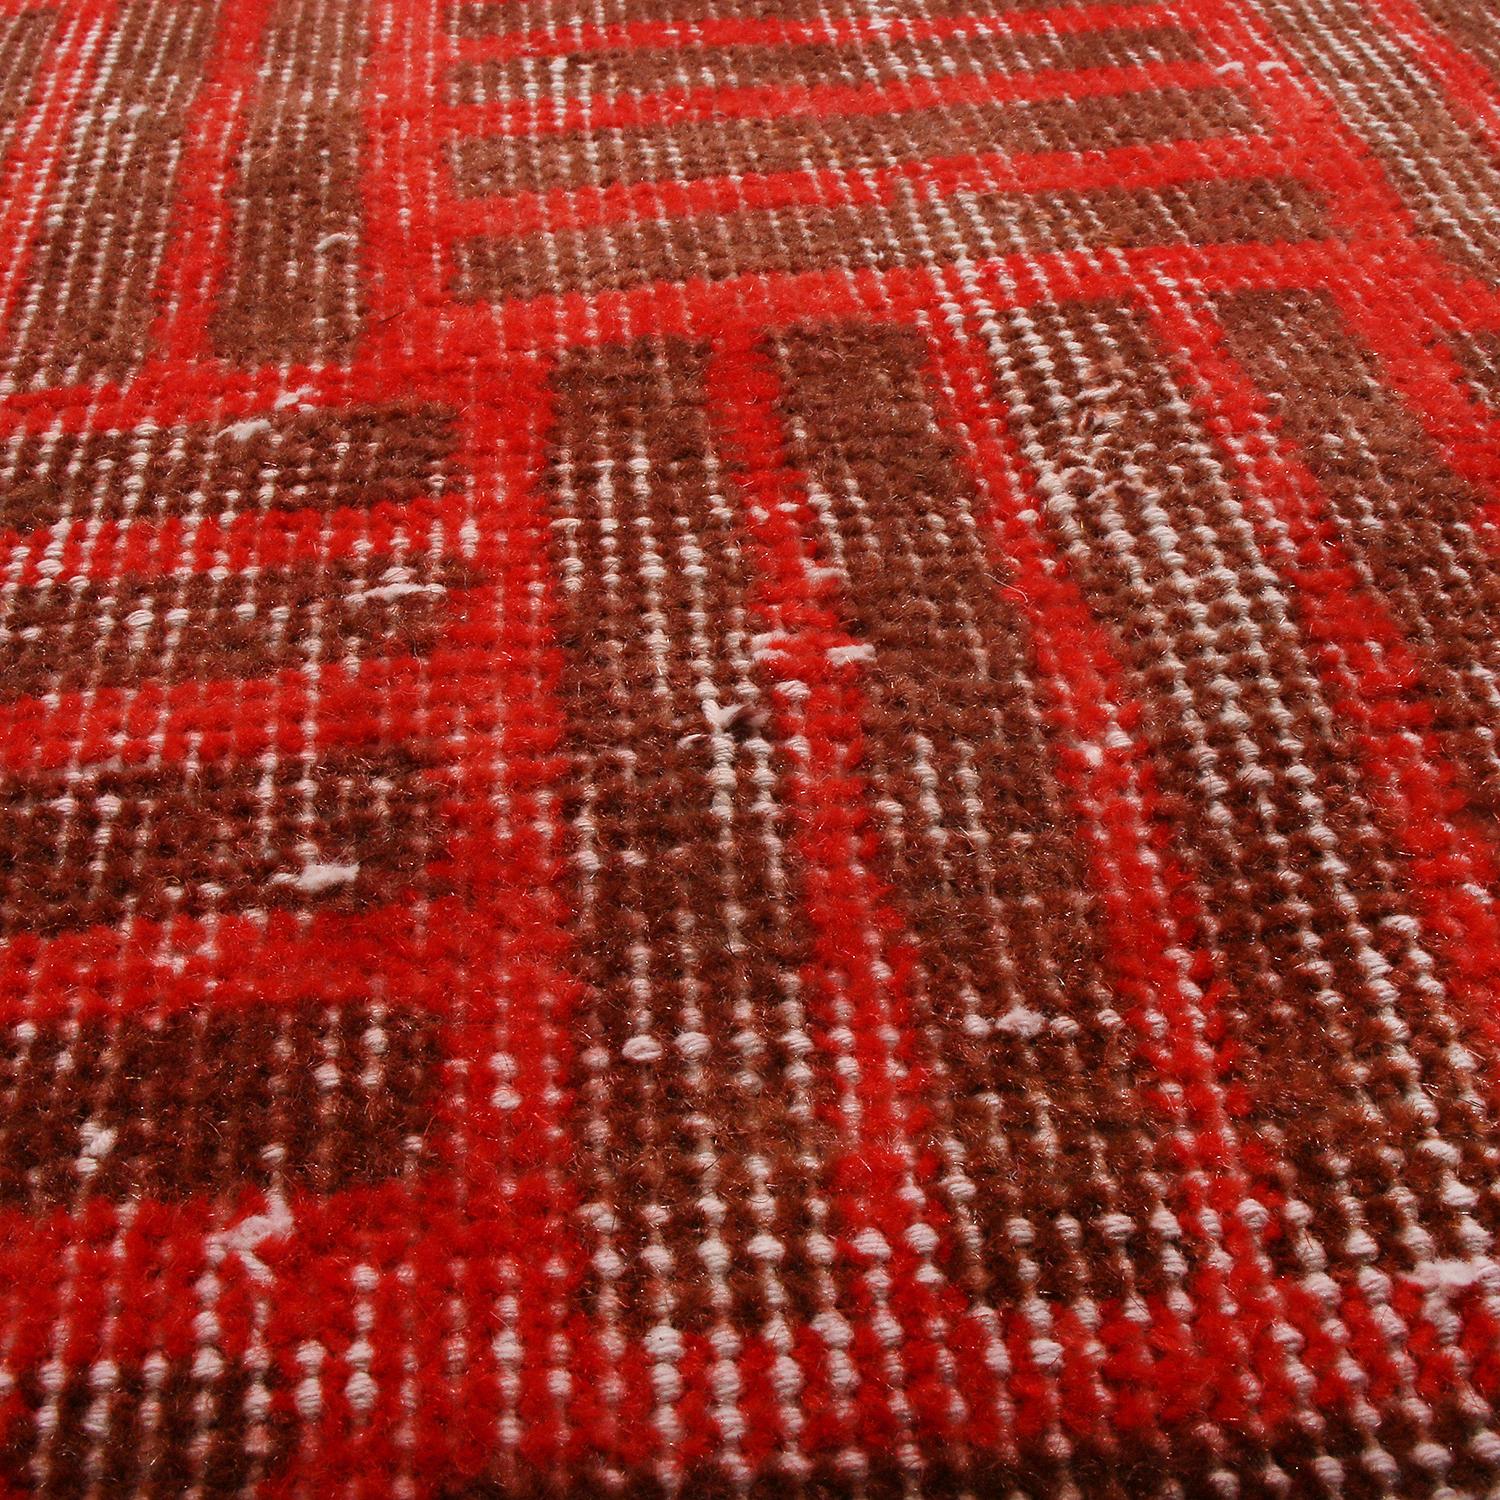 Hand-Knotted Vintage Midcentury Red and Brown Geometric Wool Rug